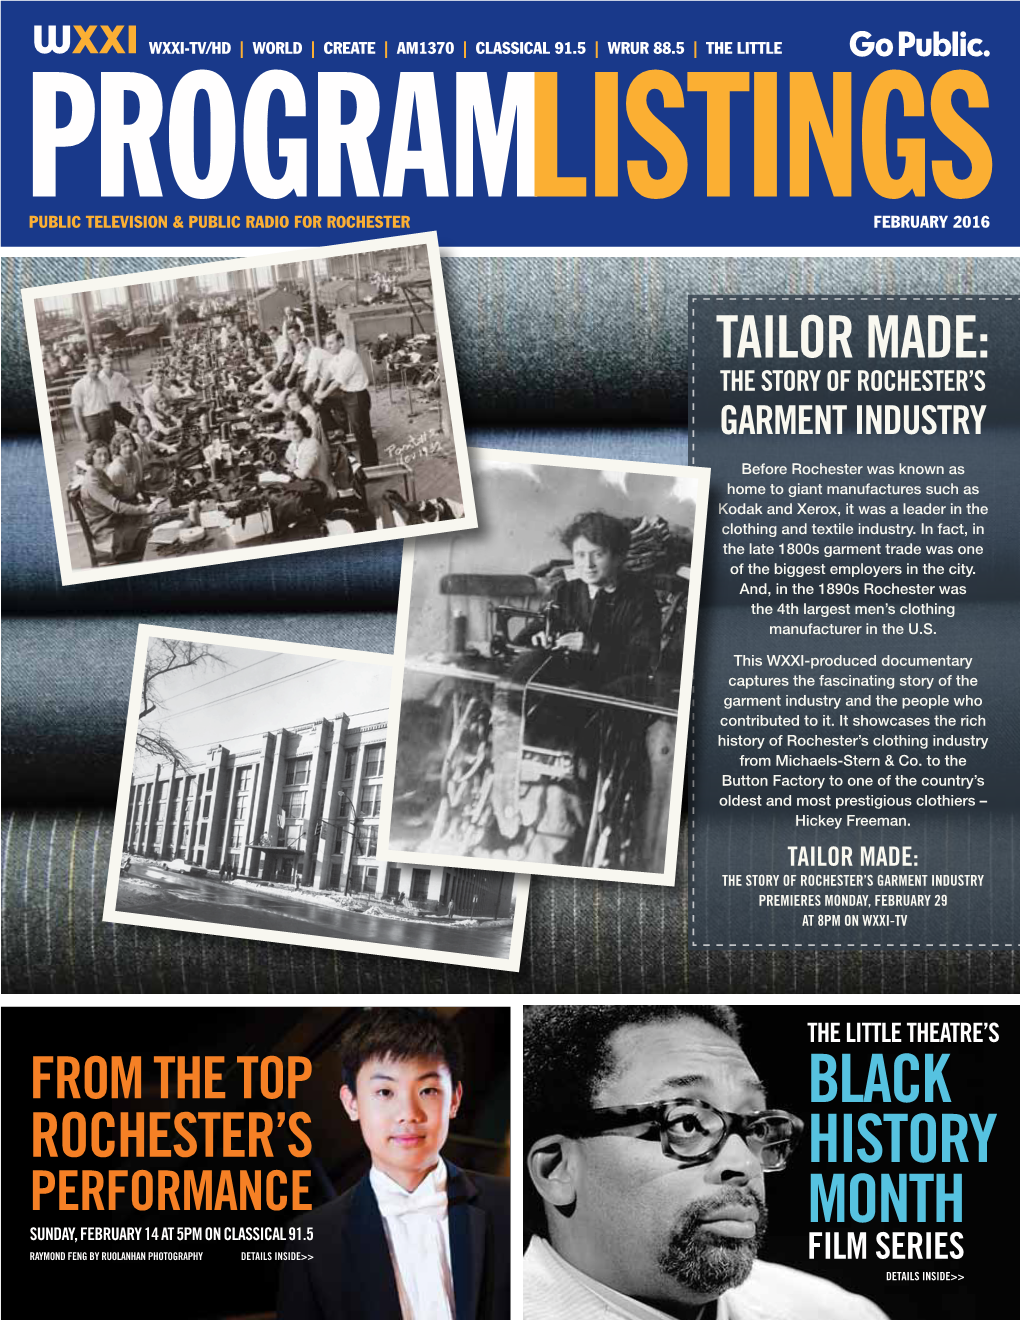 Black History Month, and WXXI Is Proud to Present a Variety of Corporate Sponsorships